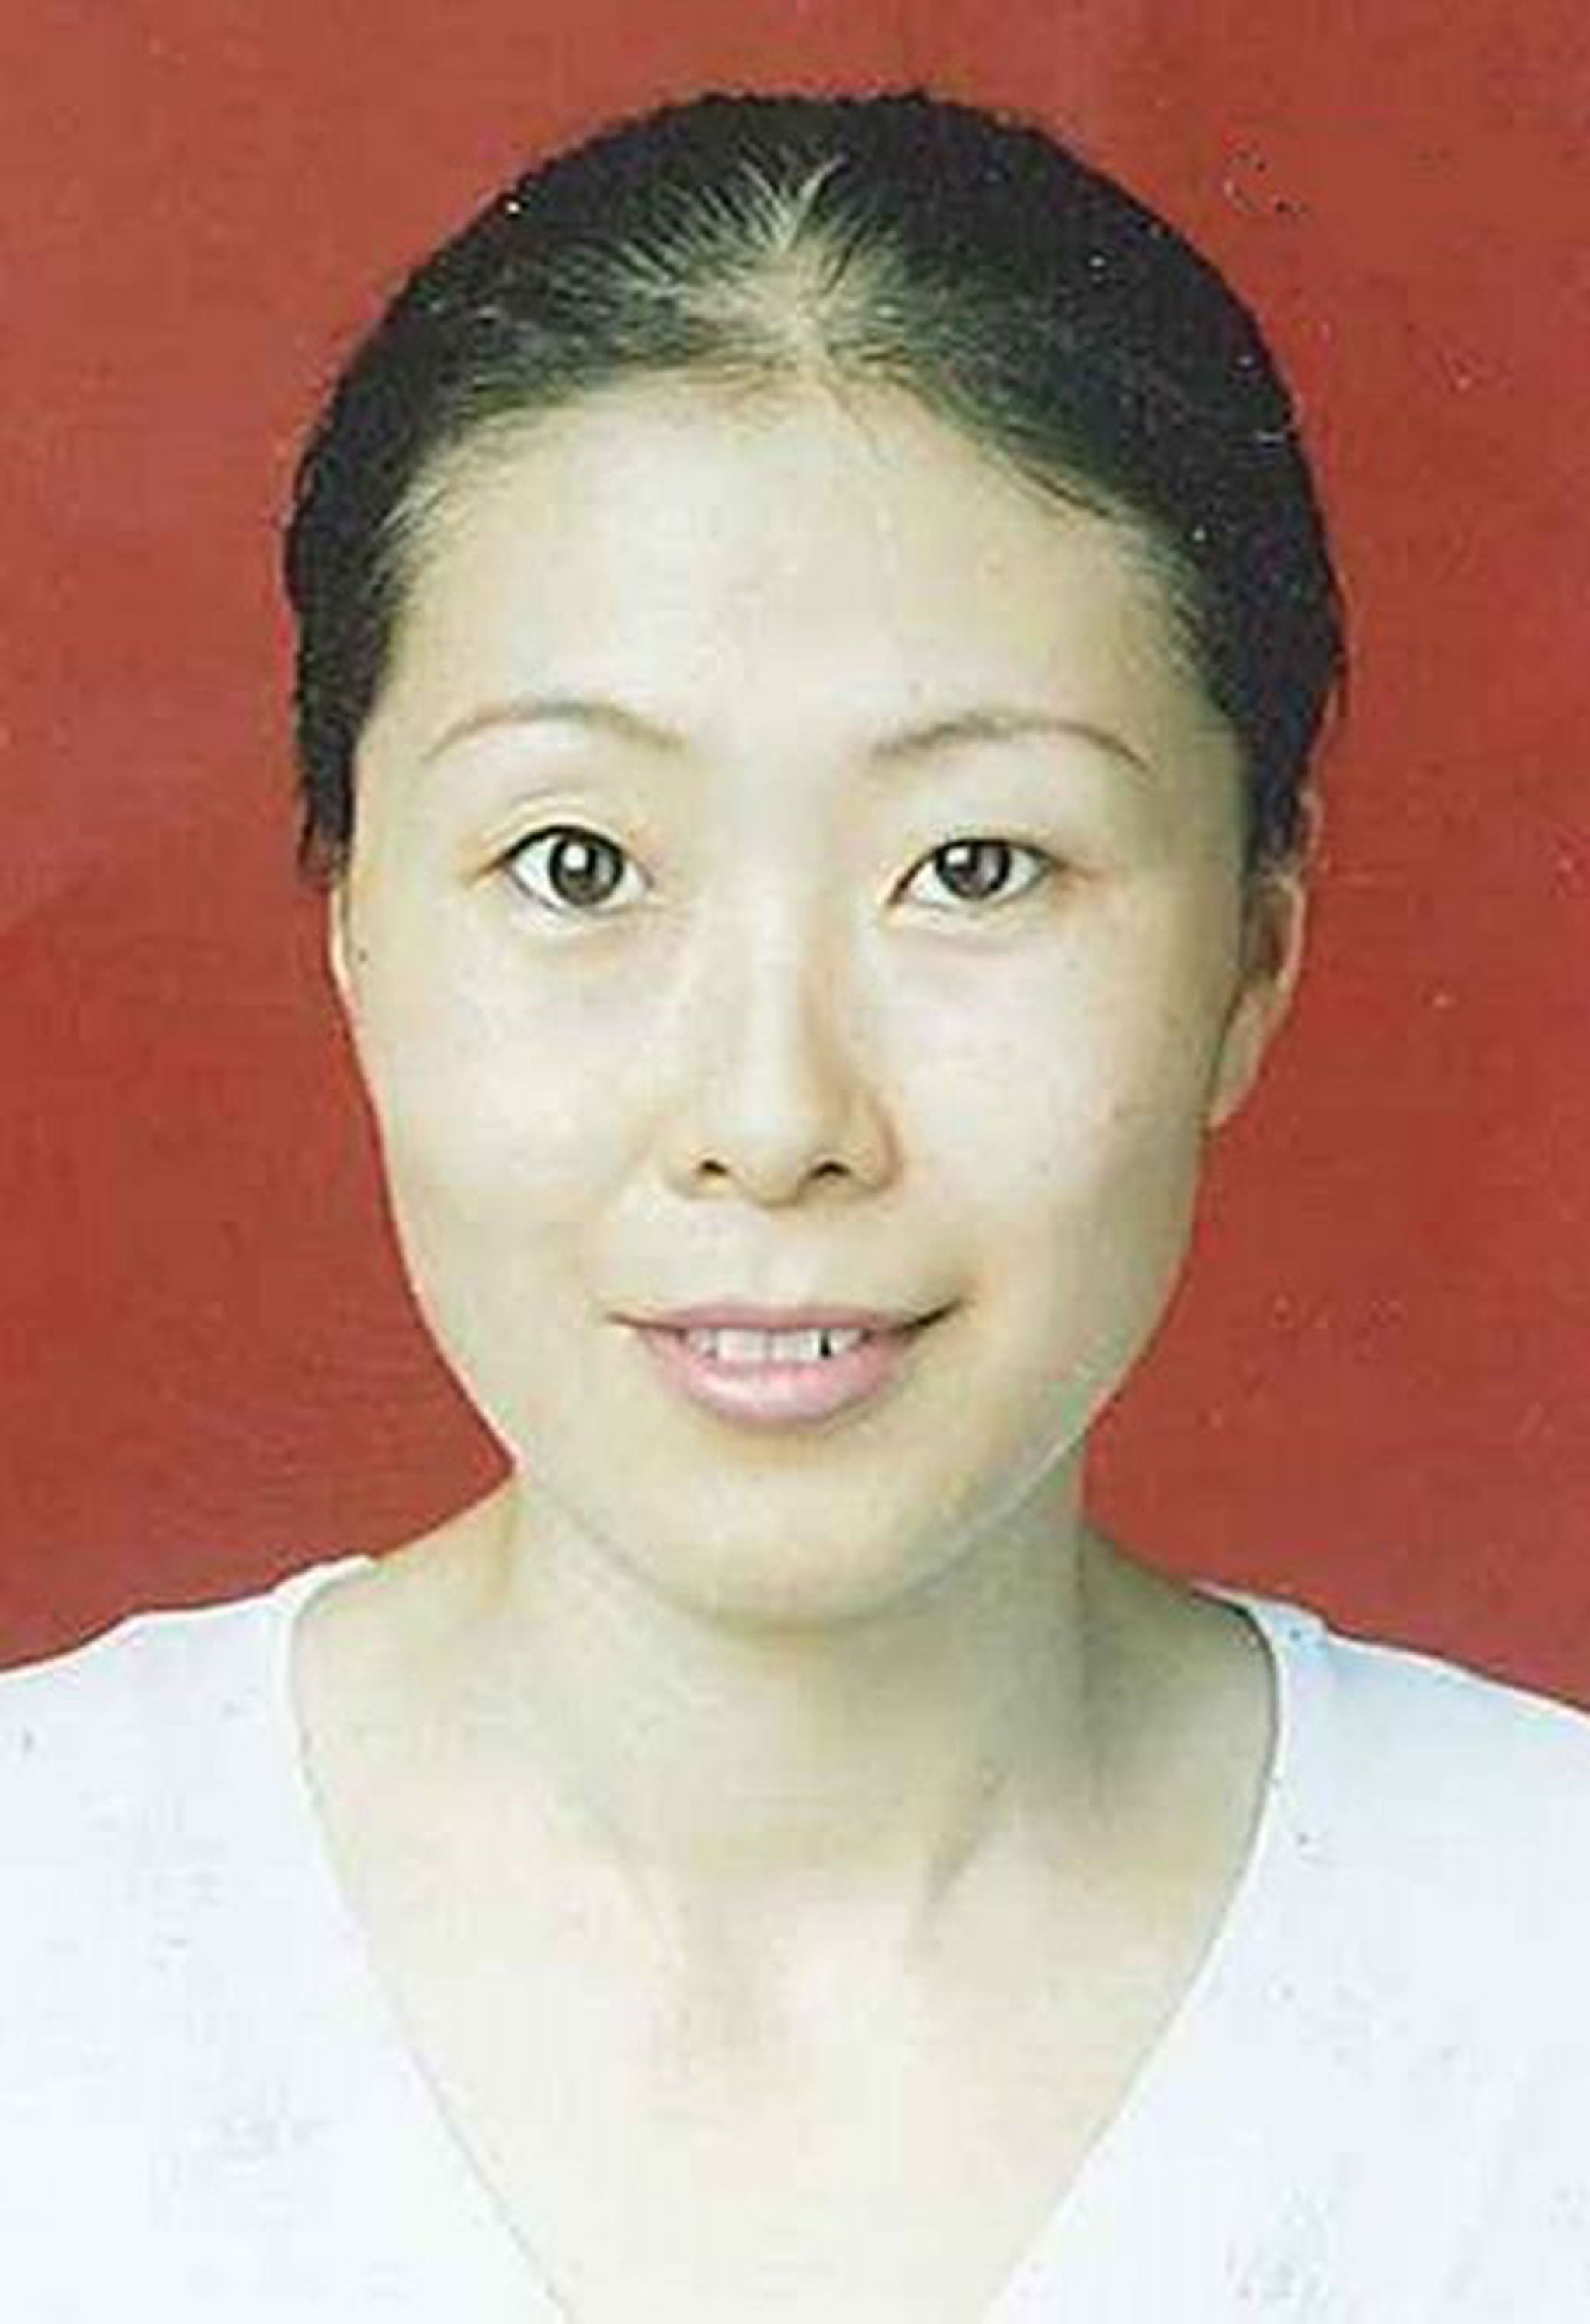 Rui Li was last seen leaving Poole Hospital in Poole, Dorset, at around 6pm on Friday 23 May